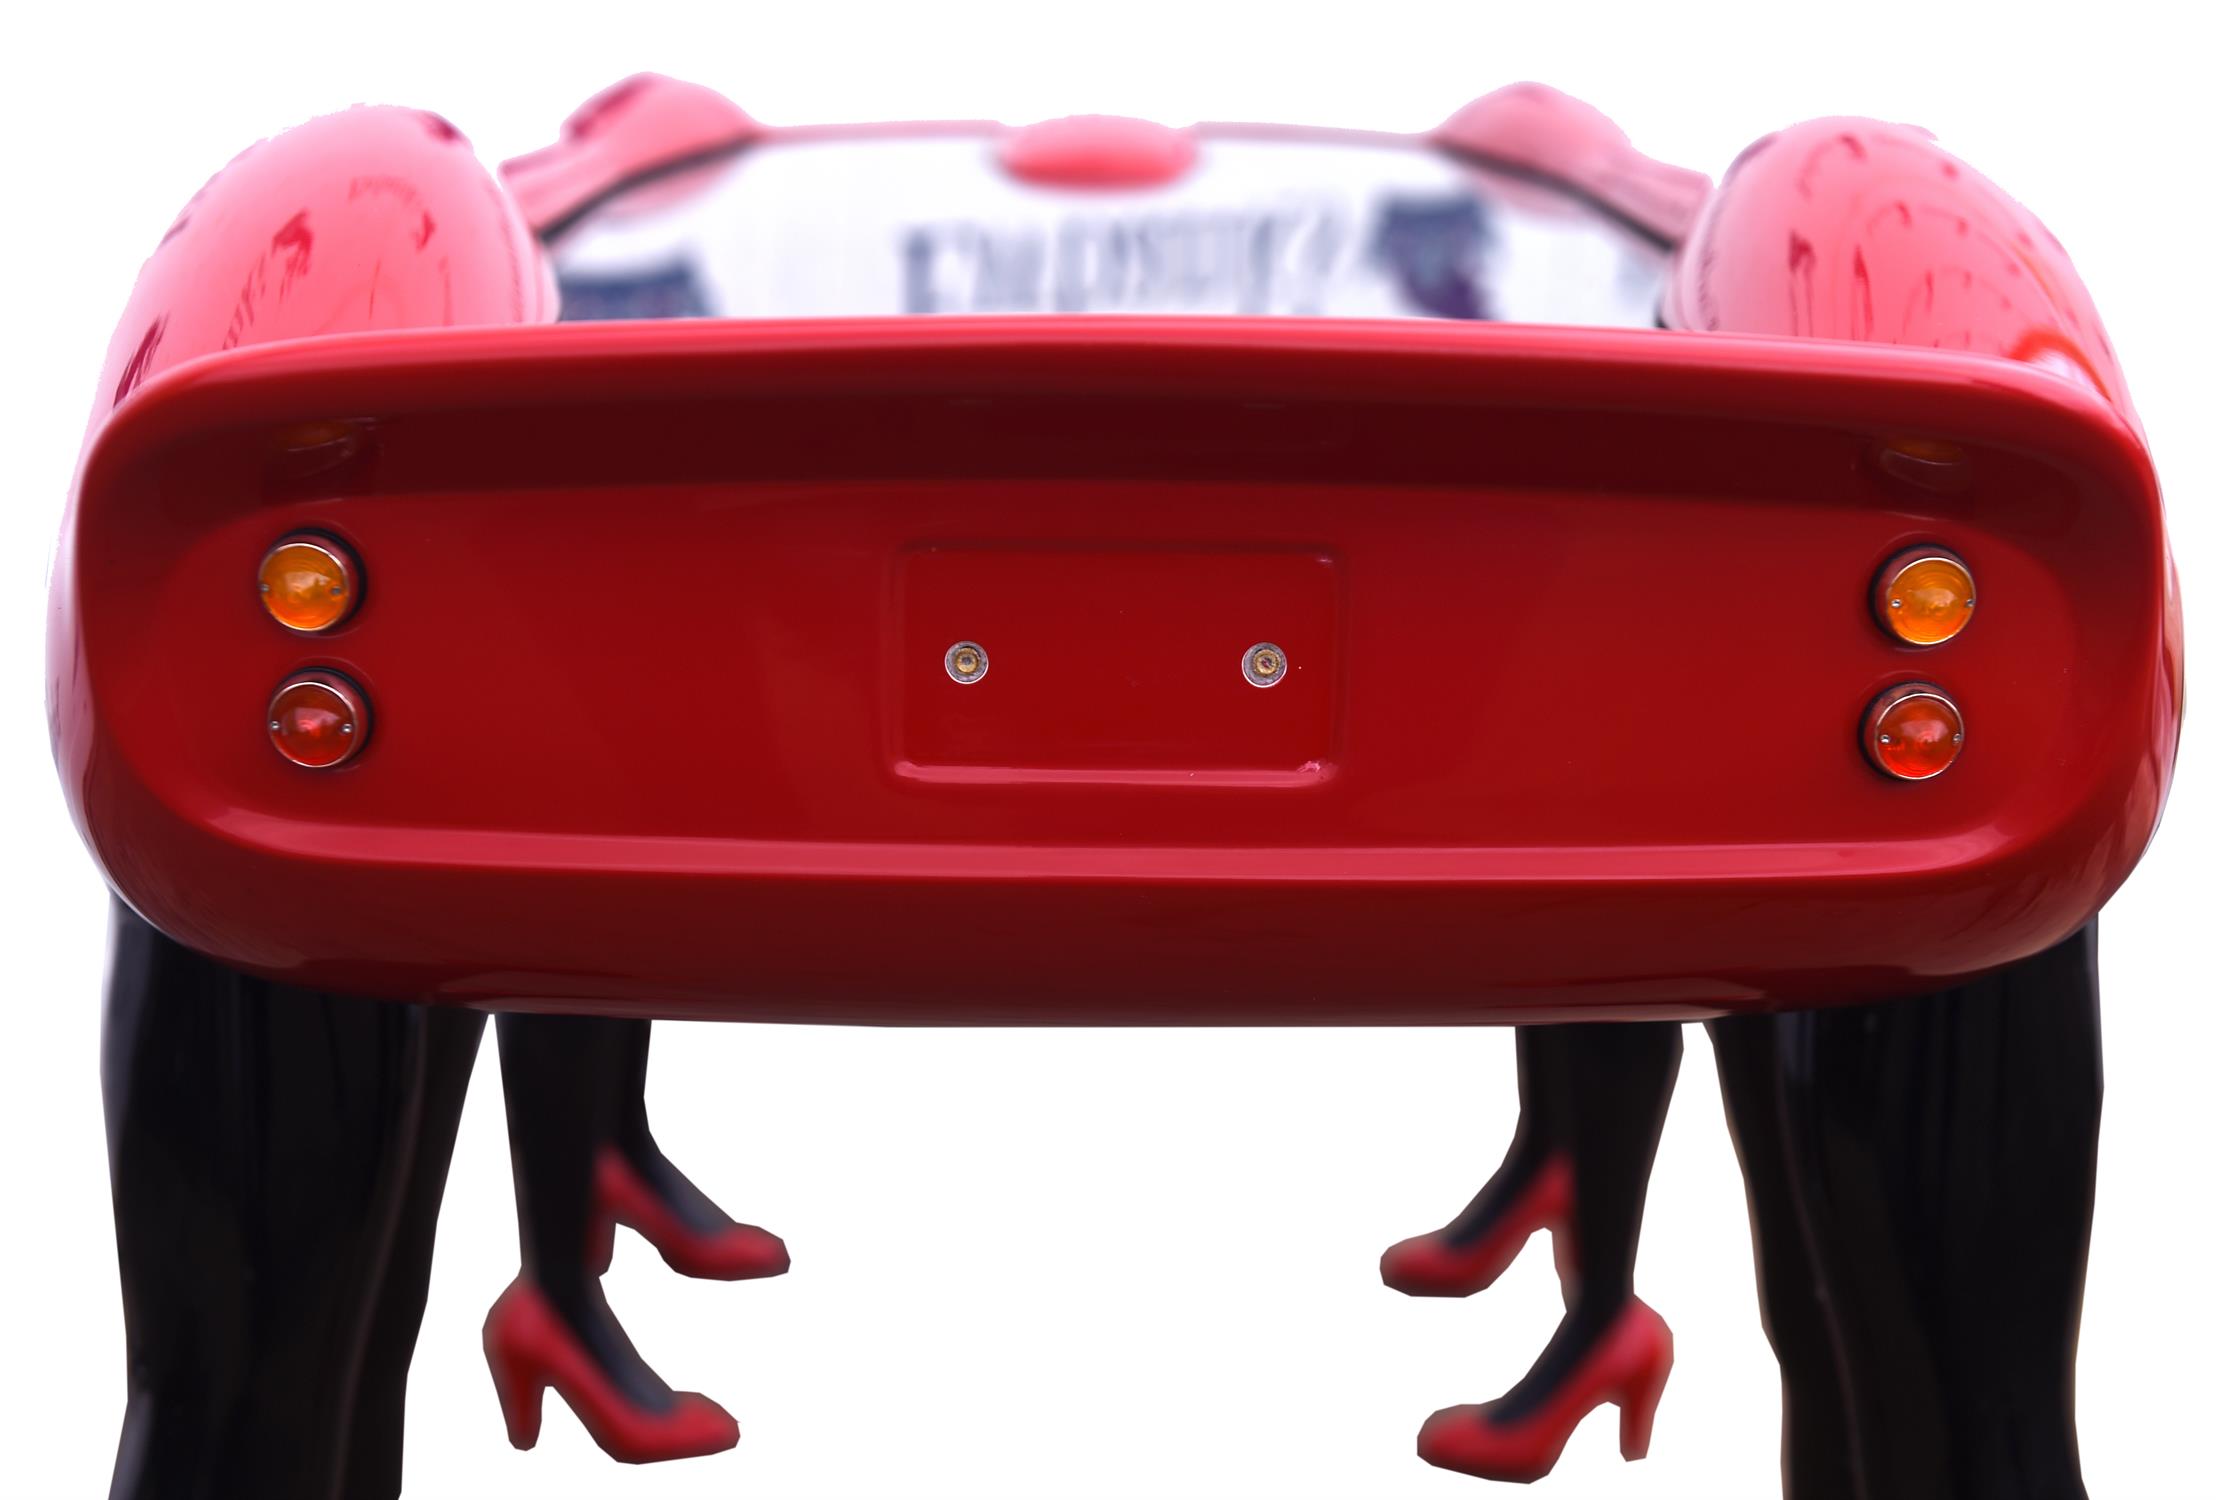 Bespoke Ferrari 250 GTO Coffee Table by Nick Butler - Titled 'P1TSTOP' With the Ferrari 250 GTO - Image 6 of 19